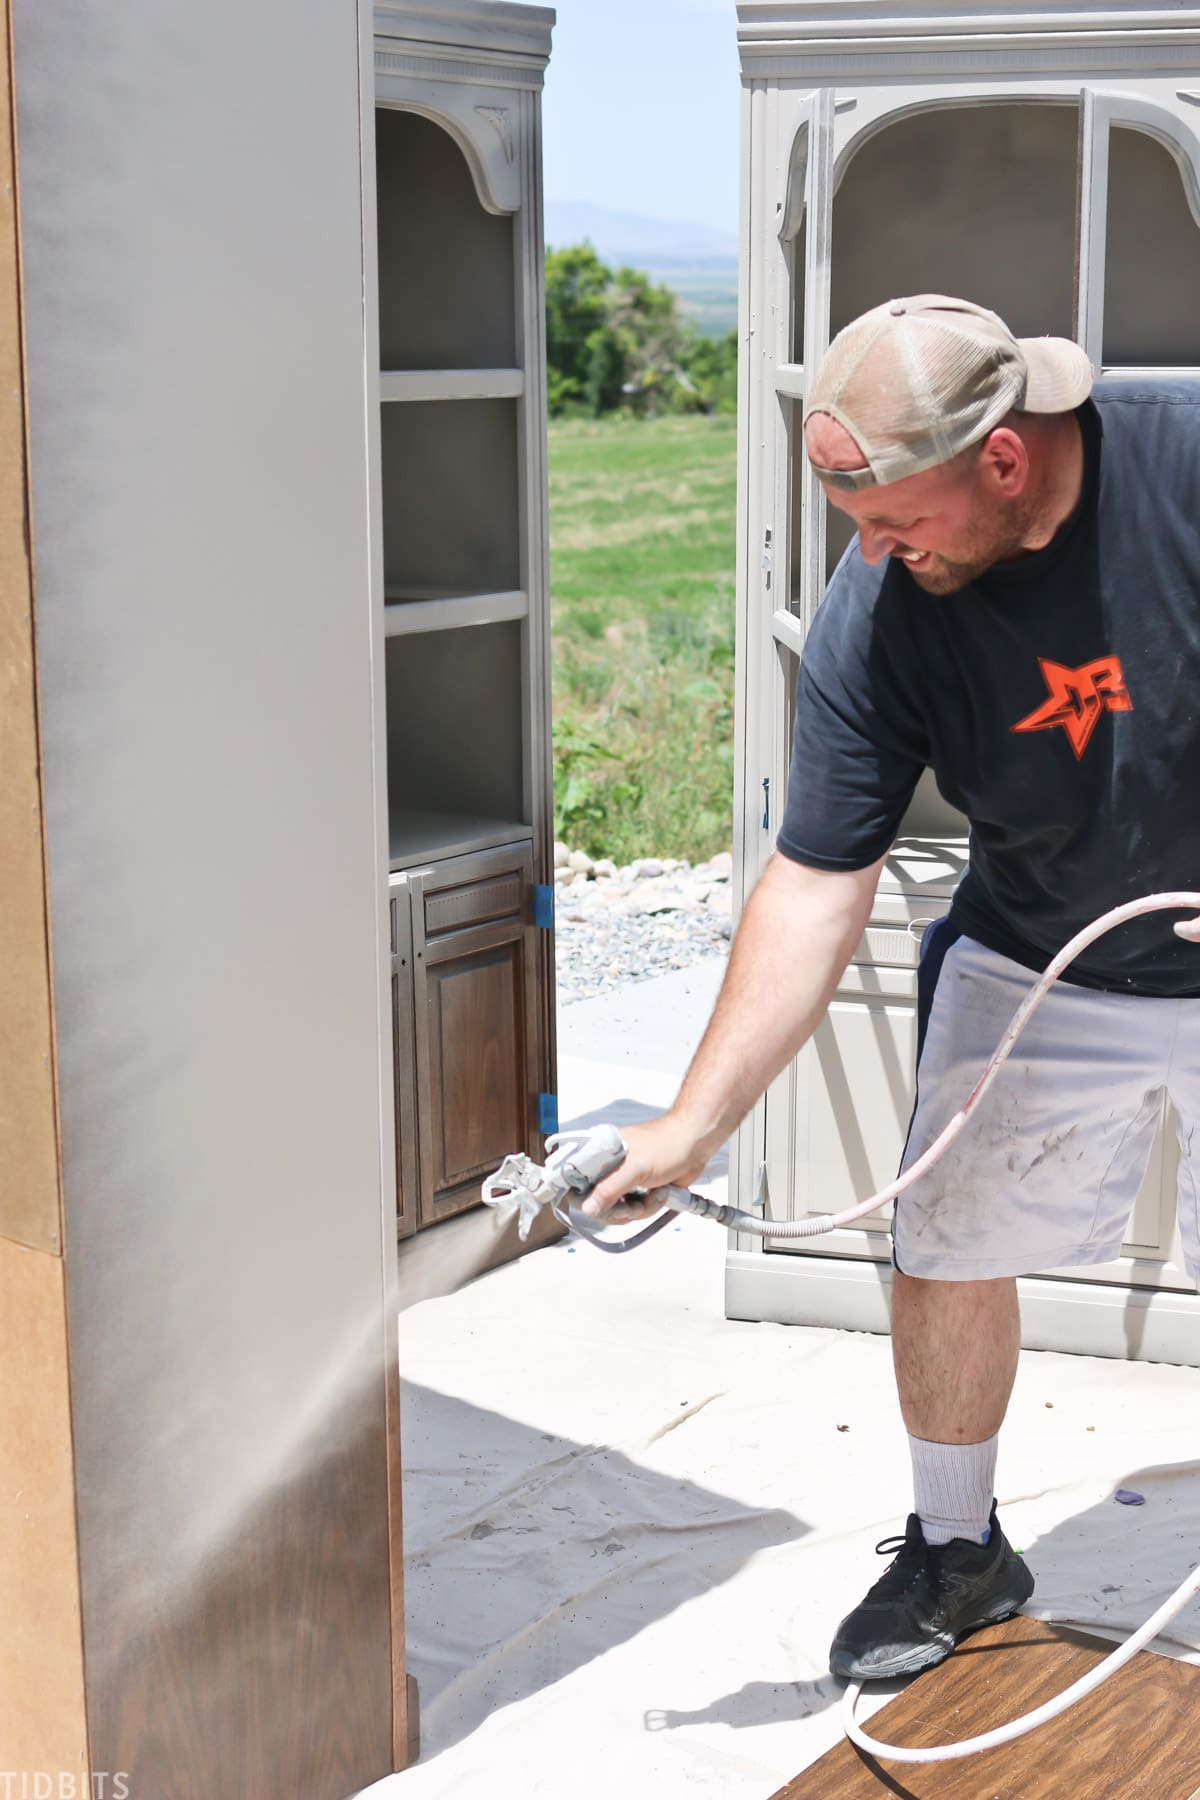 man spray painting old bookshelf with gray paint